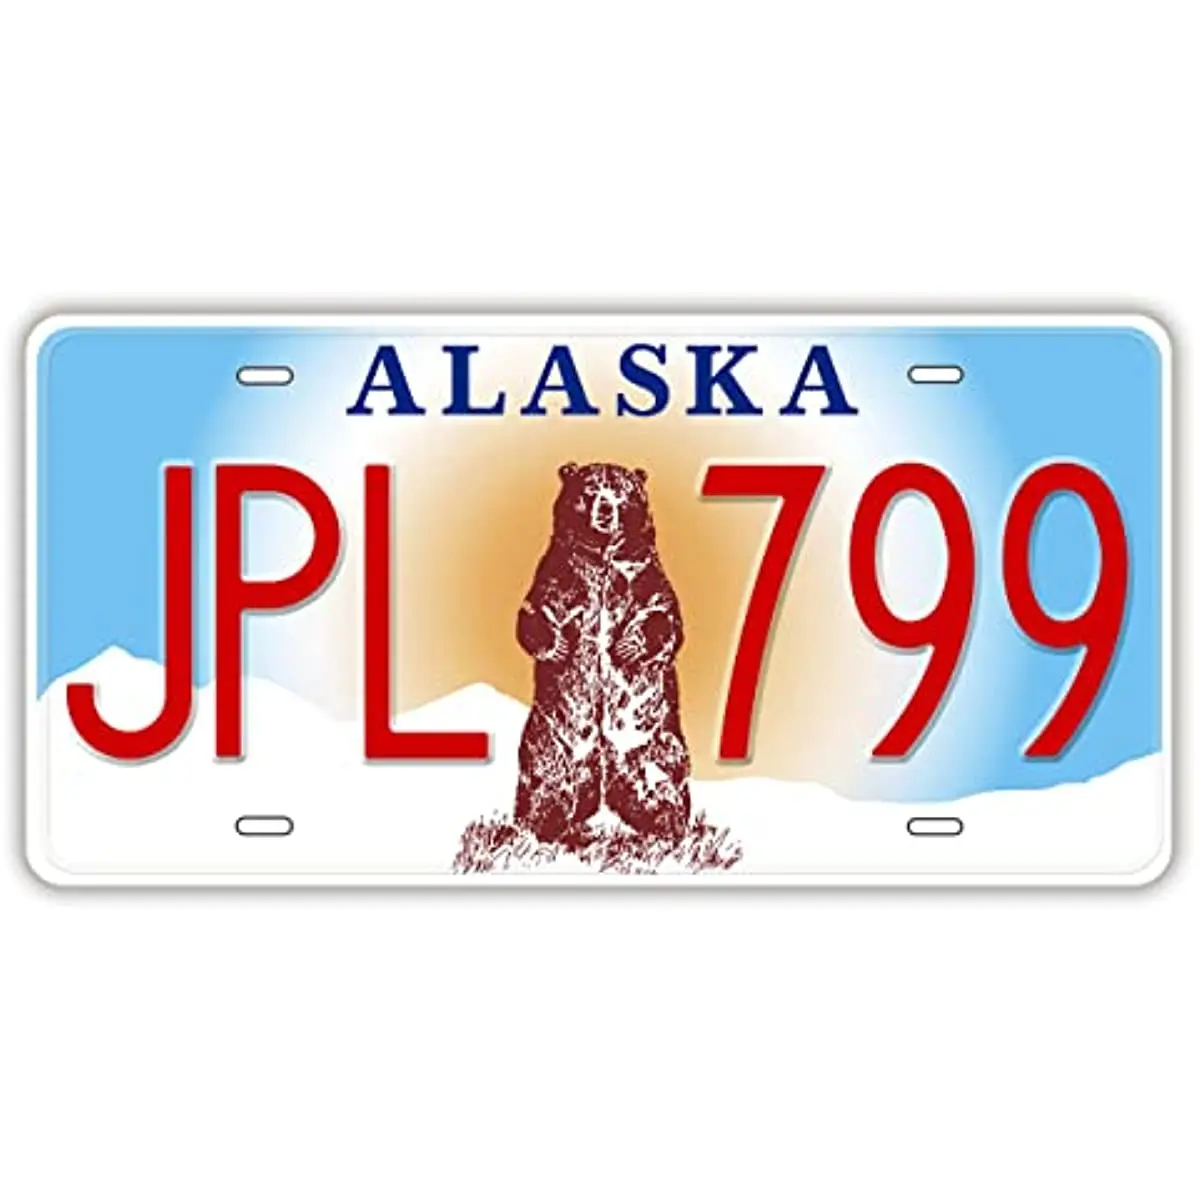 

Replica License Plate of US States, Novelty Metal Number Tags, Prop Car Registration Plates, 12x6 Inches (Alaska) home decor